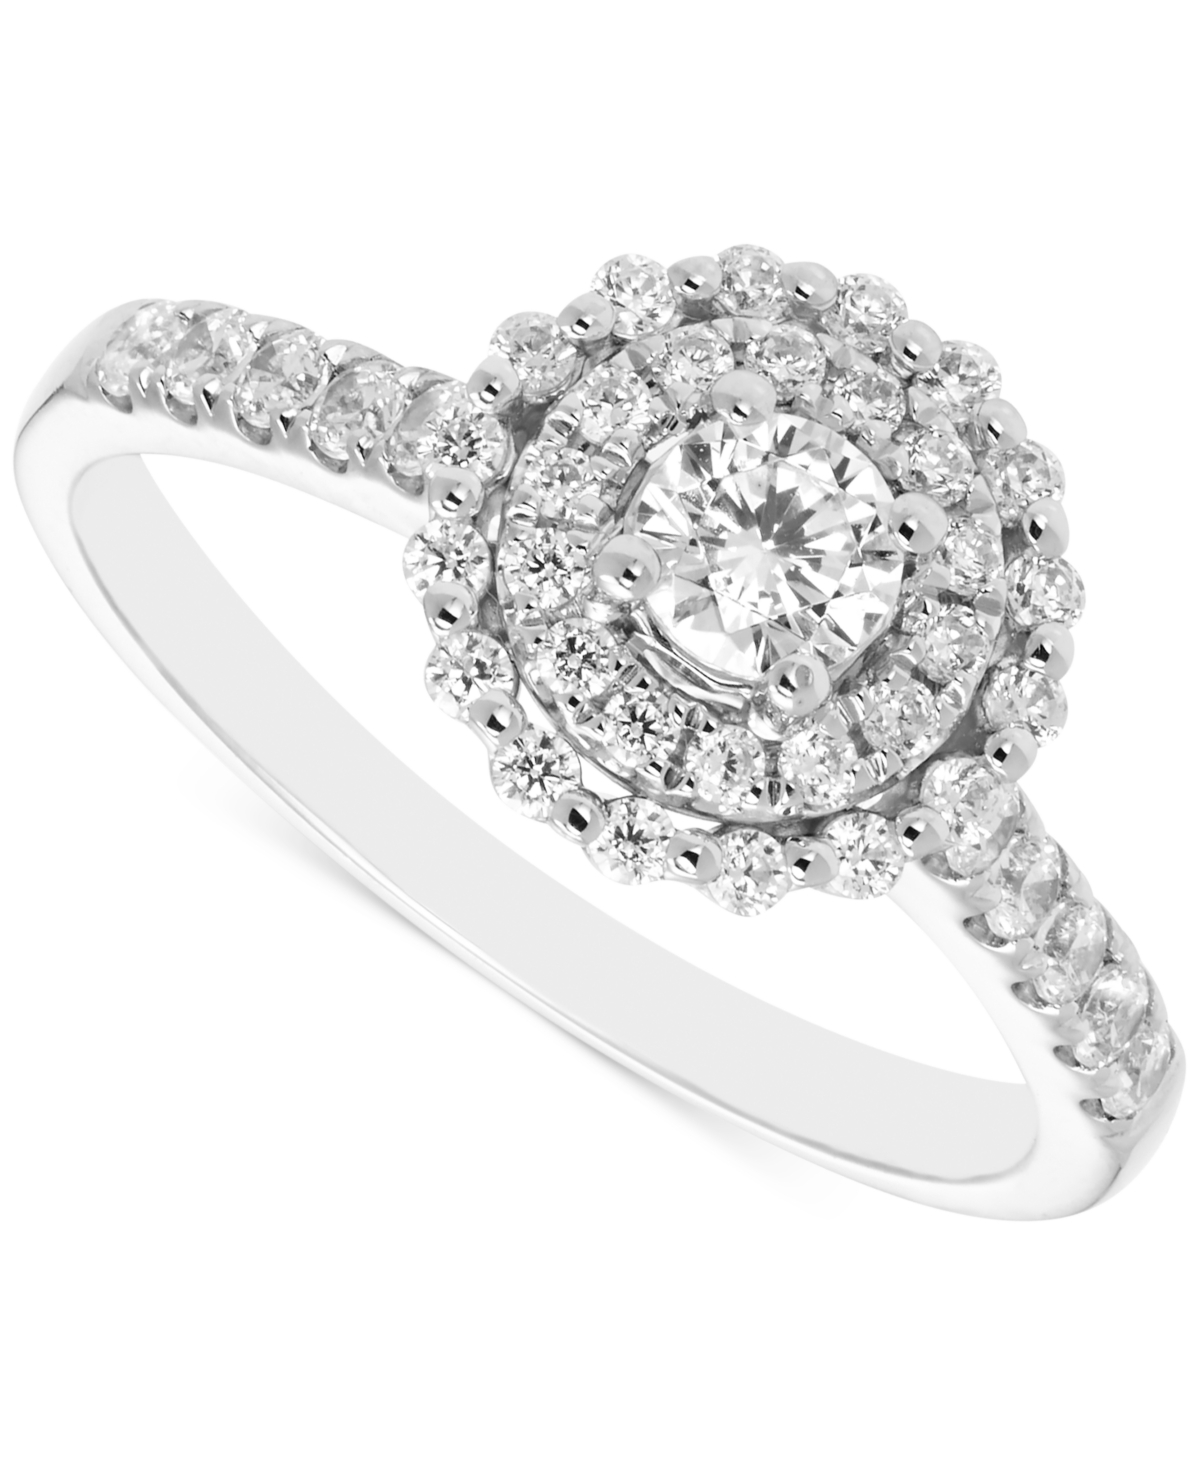 Diamond Double Halo Engagement Ring (5/8 ct. t.w.) in 14k White Gold - White Gold